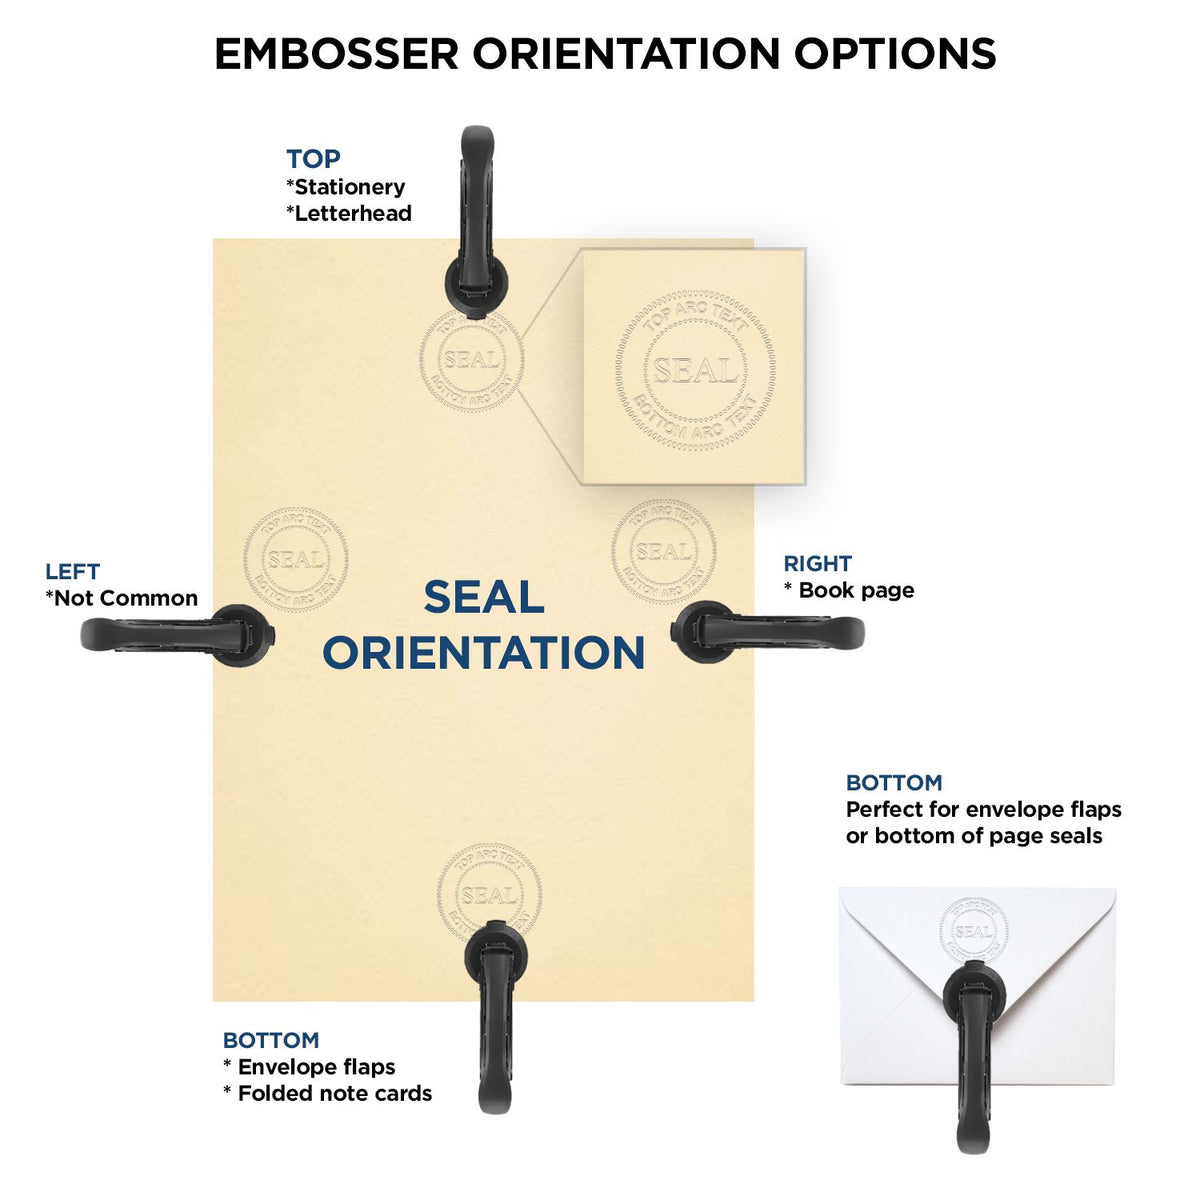 An infographic for the Long Reach Illinois PE Seal showing embosser orientation, this is showing examples of a top, bottom, right and left insert.